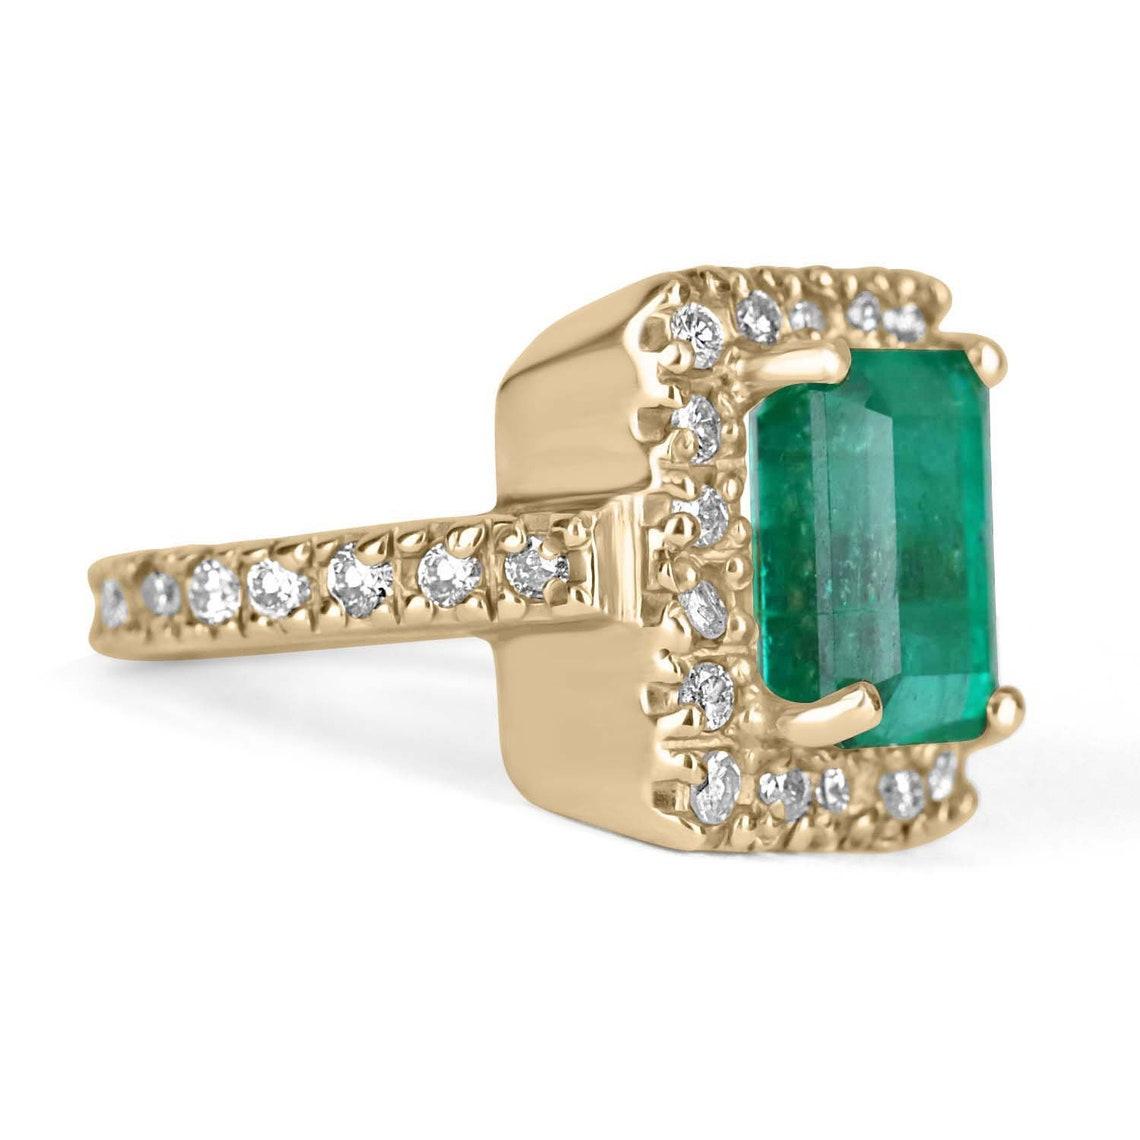 Displayed is a vintage Colombian emerald and diamond halo ring. The center gem is an emerald cut emerald filled with life and brilliance! Among the impressive qualities of the emerald, a vivid green color and beautiful eye clarity are seen. Small